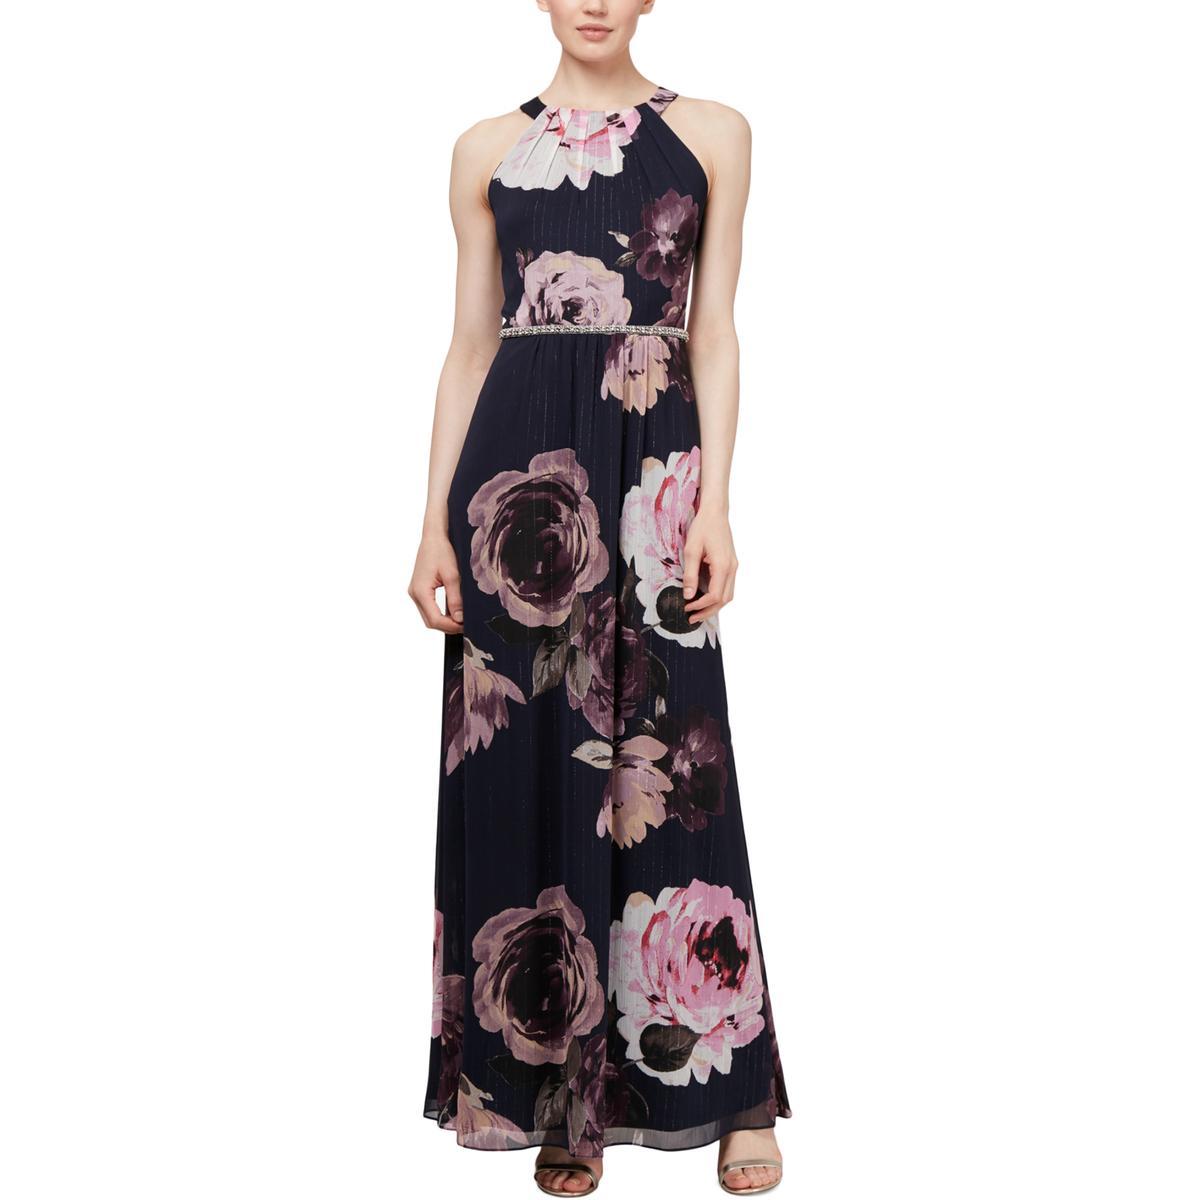 SLNY Womens Navy Embellished Floral Maxi Evening Dress Gown 10 BHFO ...